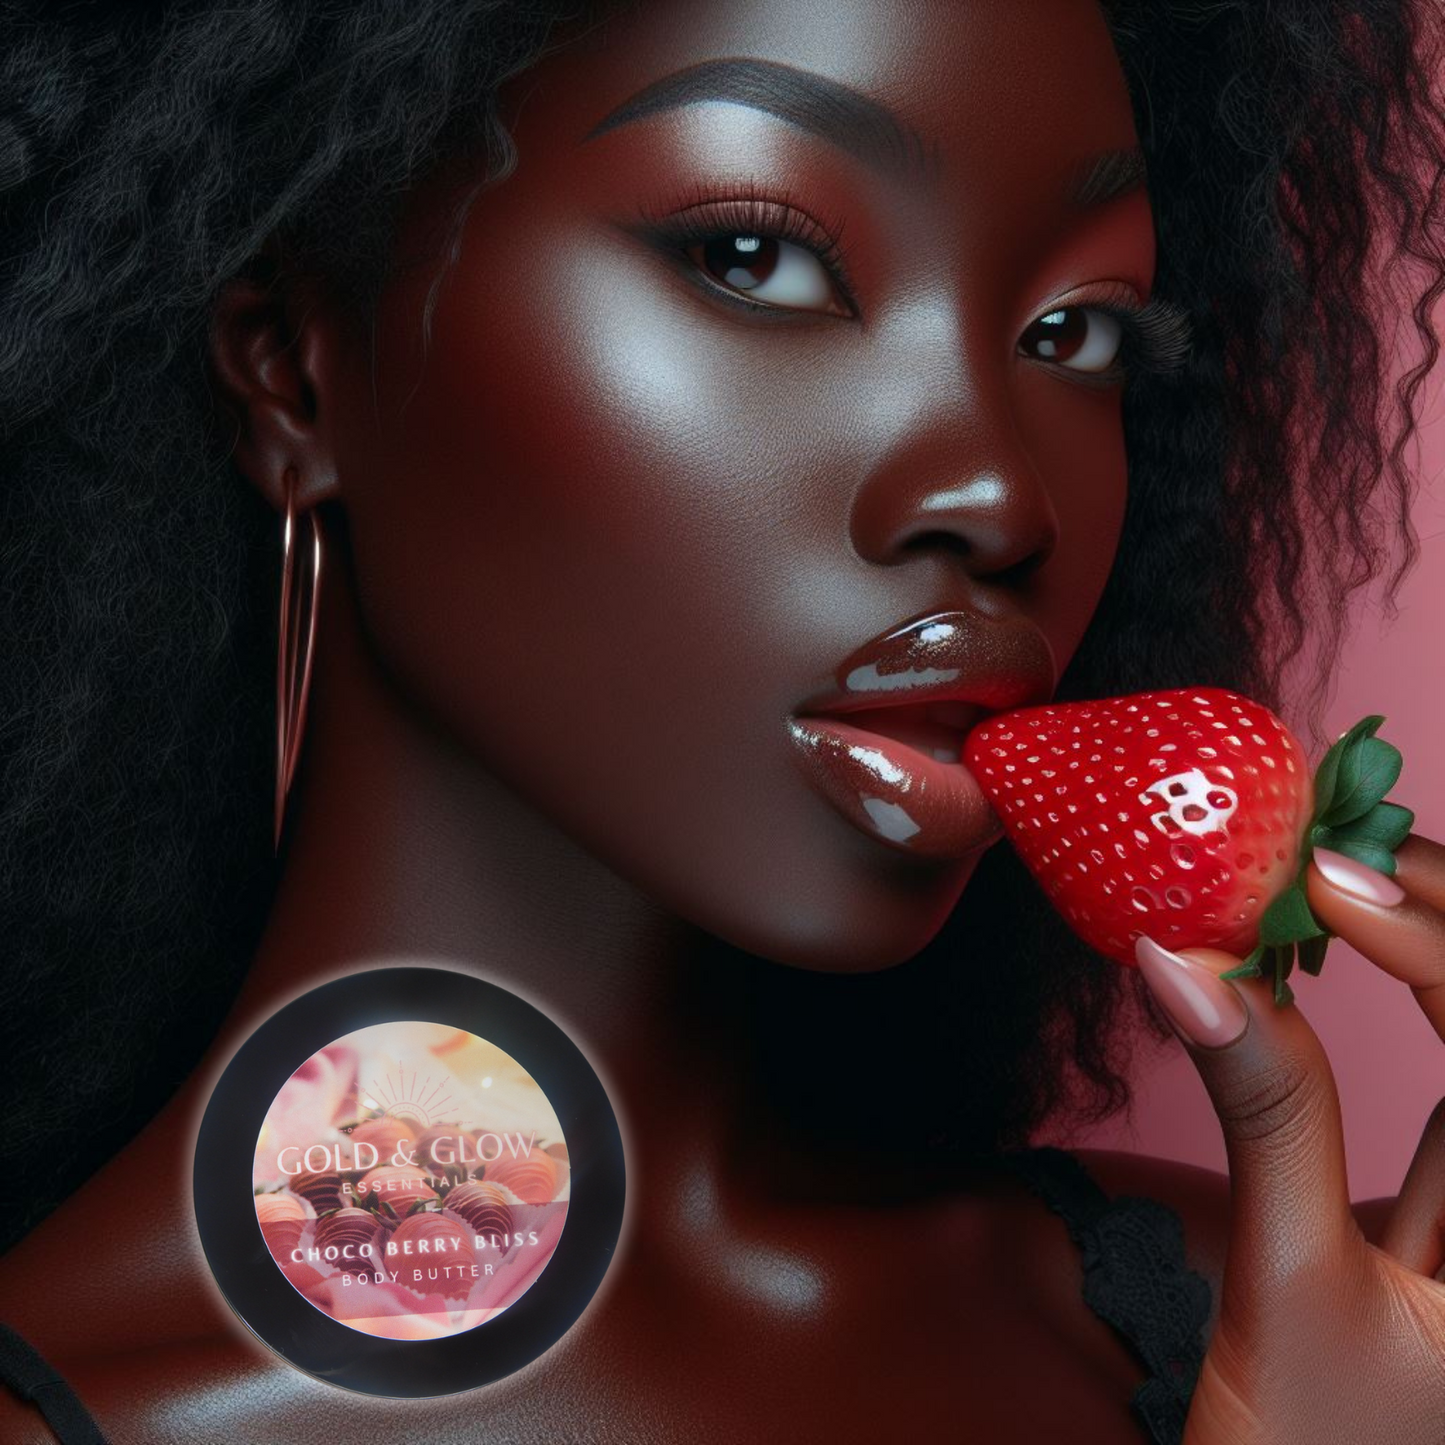 Choco Berry Bliss| Body Butter